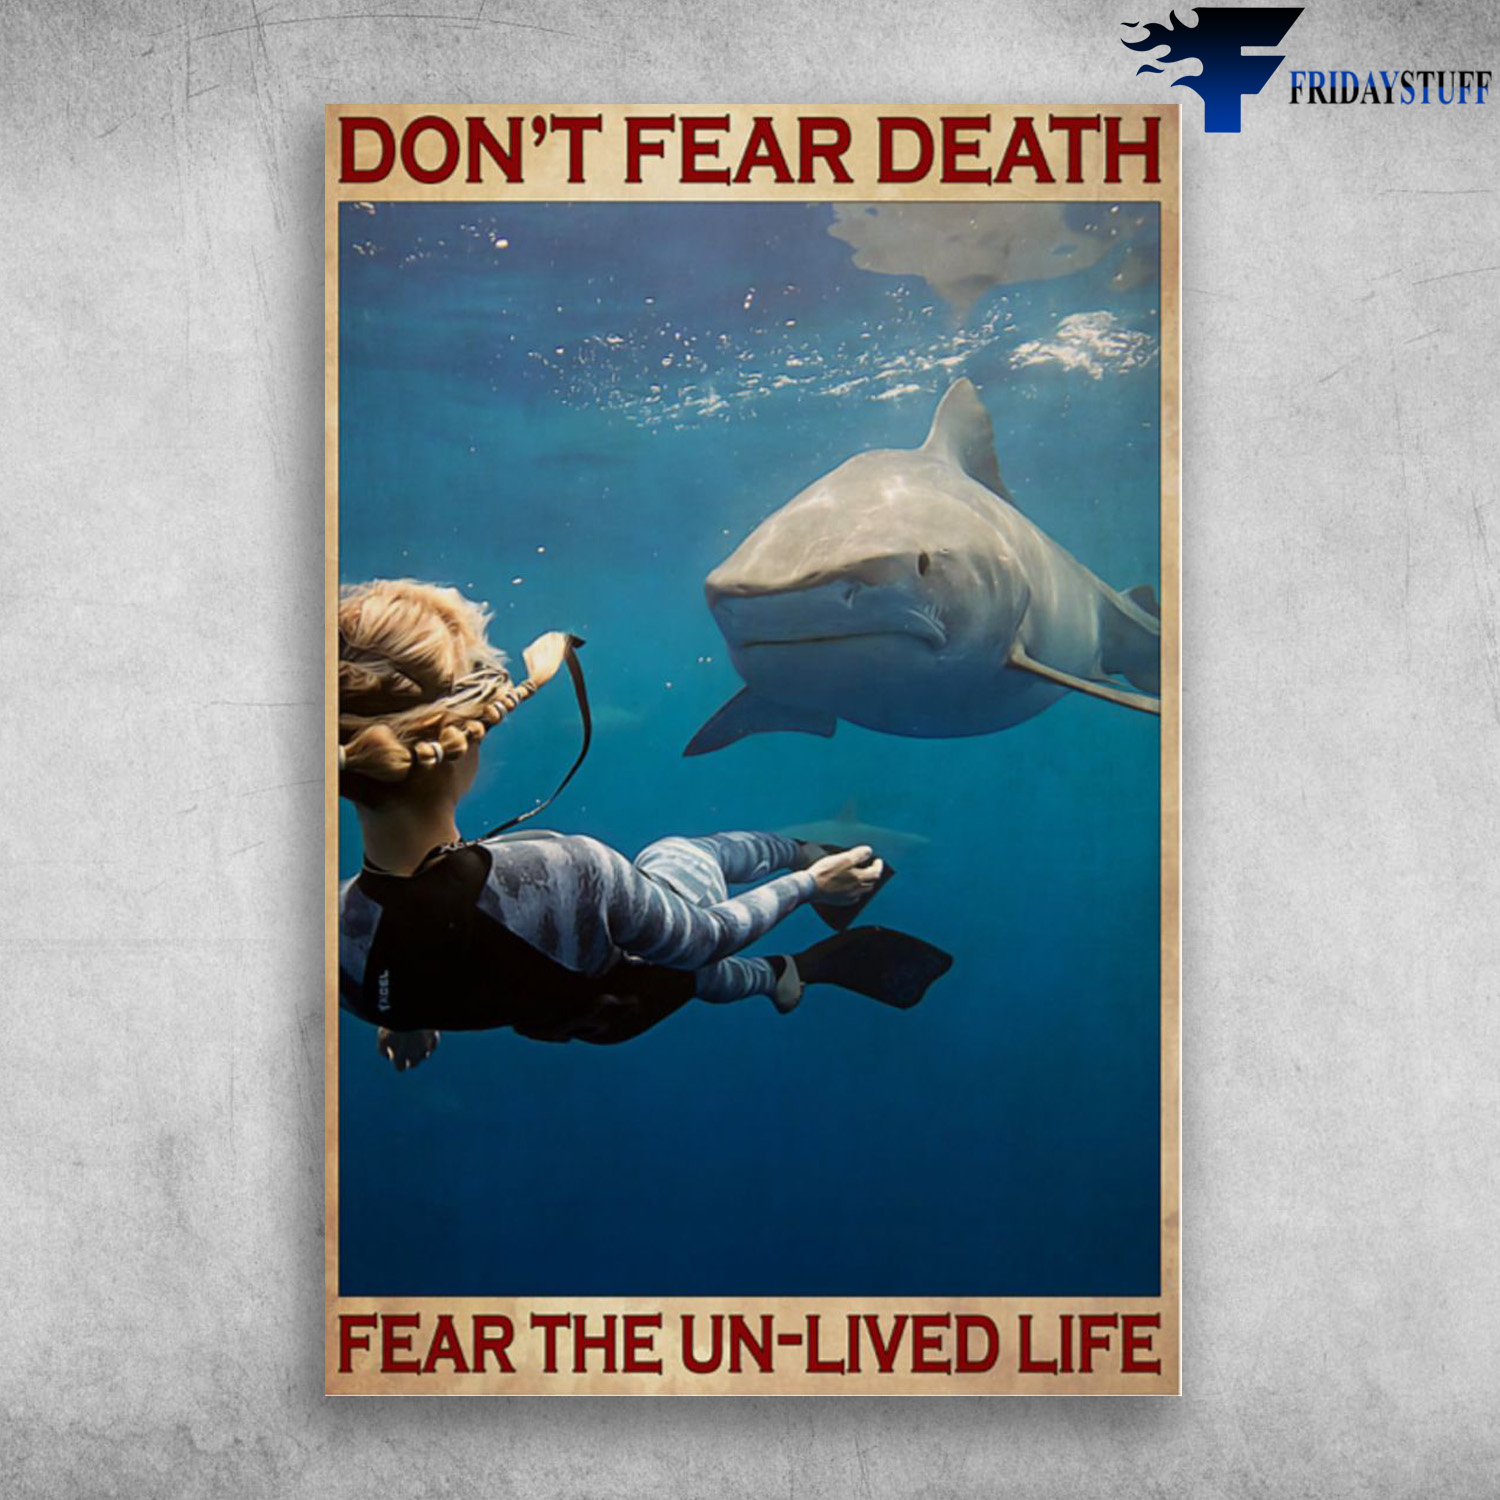 Girl Diving With Shark - Don't Fear Death, Fear The Un-Lived Life